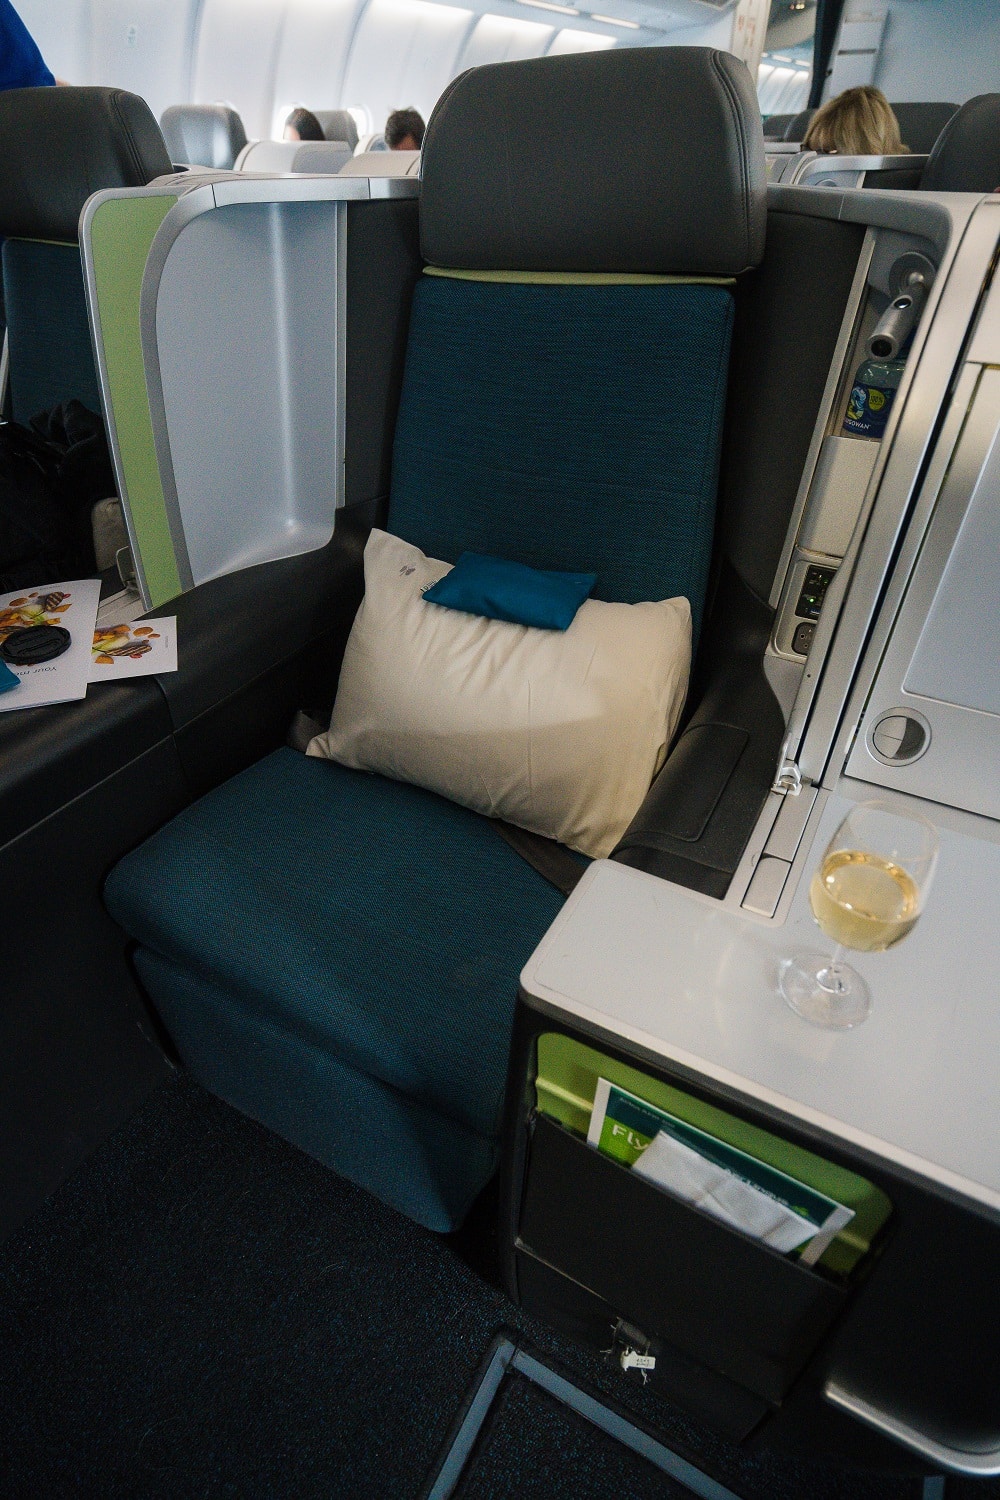 aer lingus business class seat with champagne